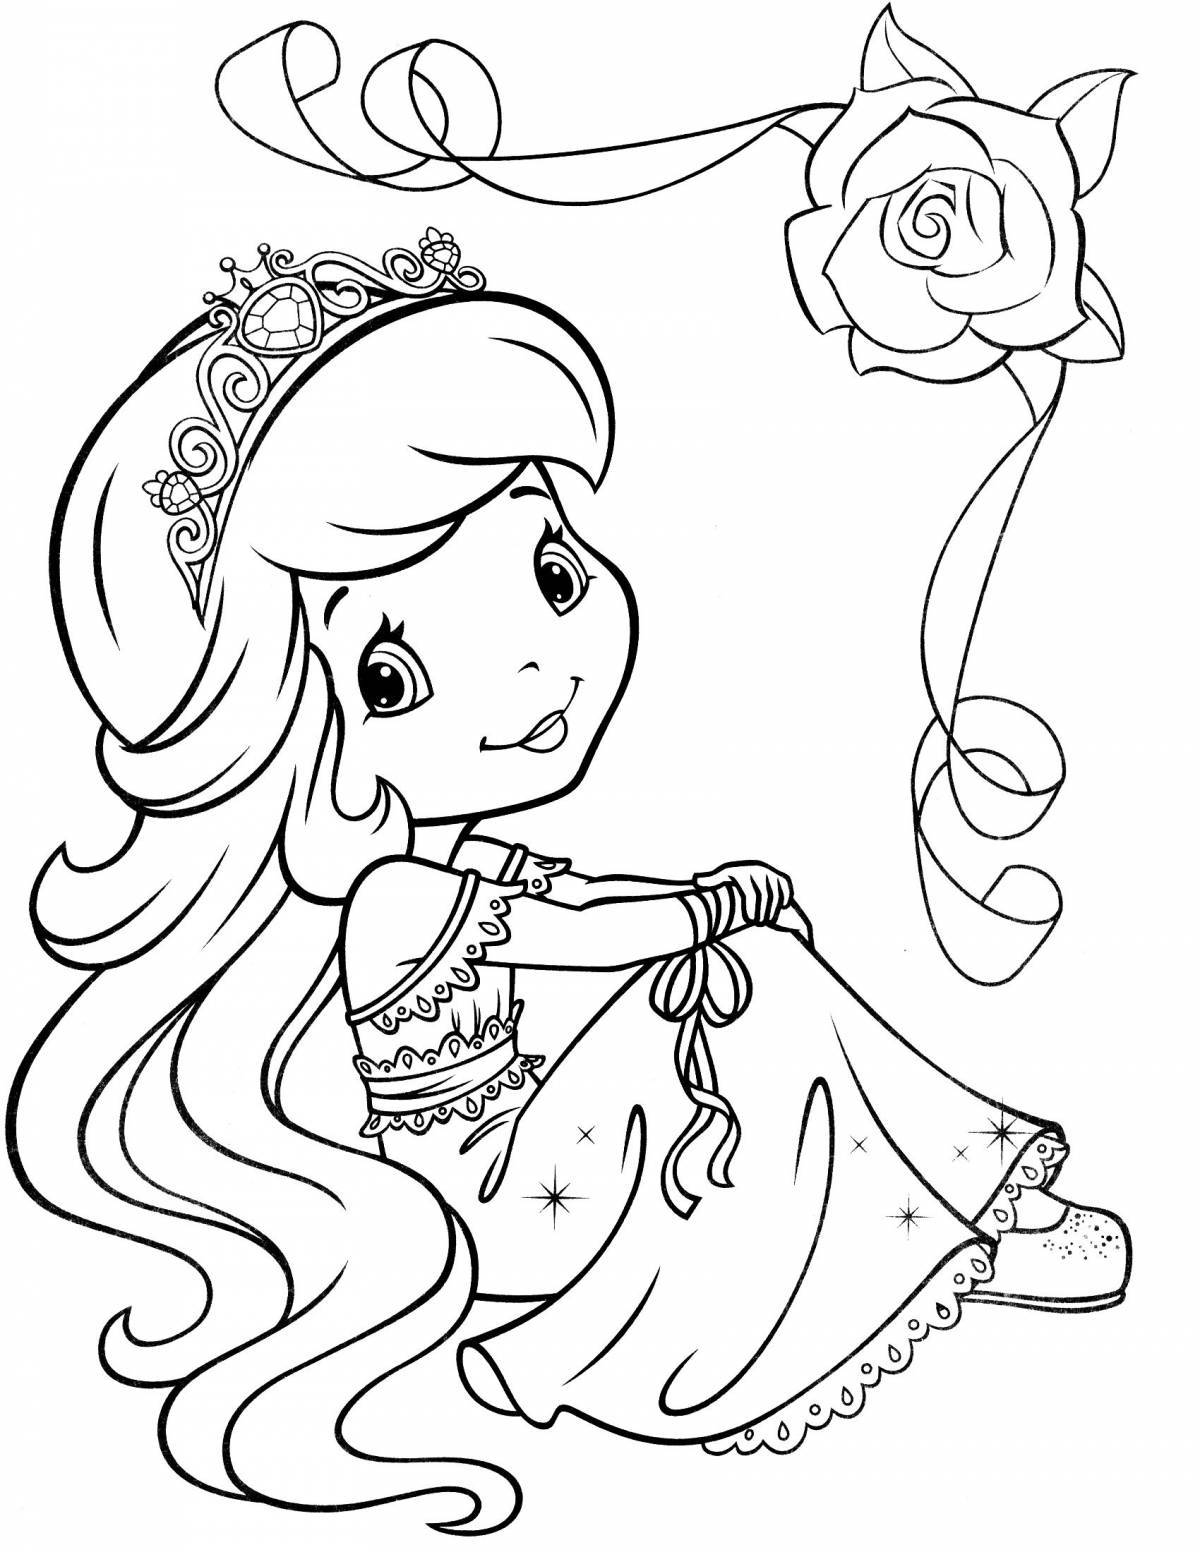 Coloring for girls